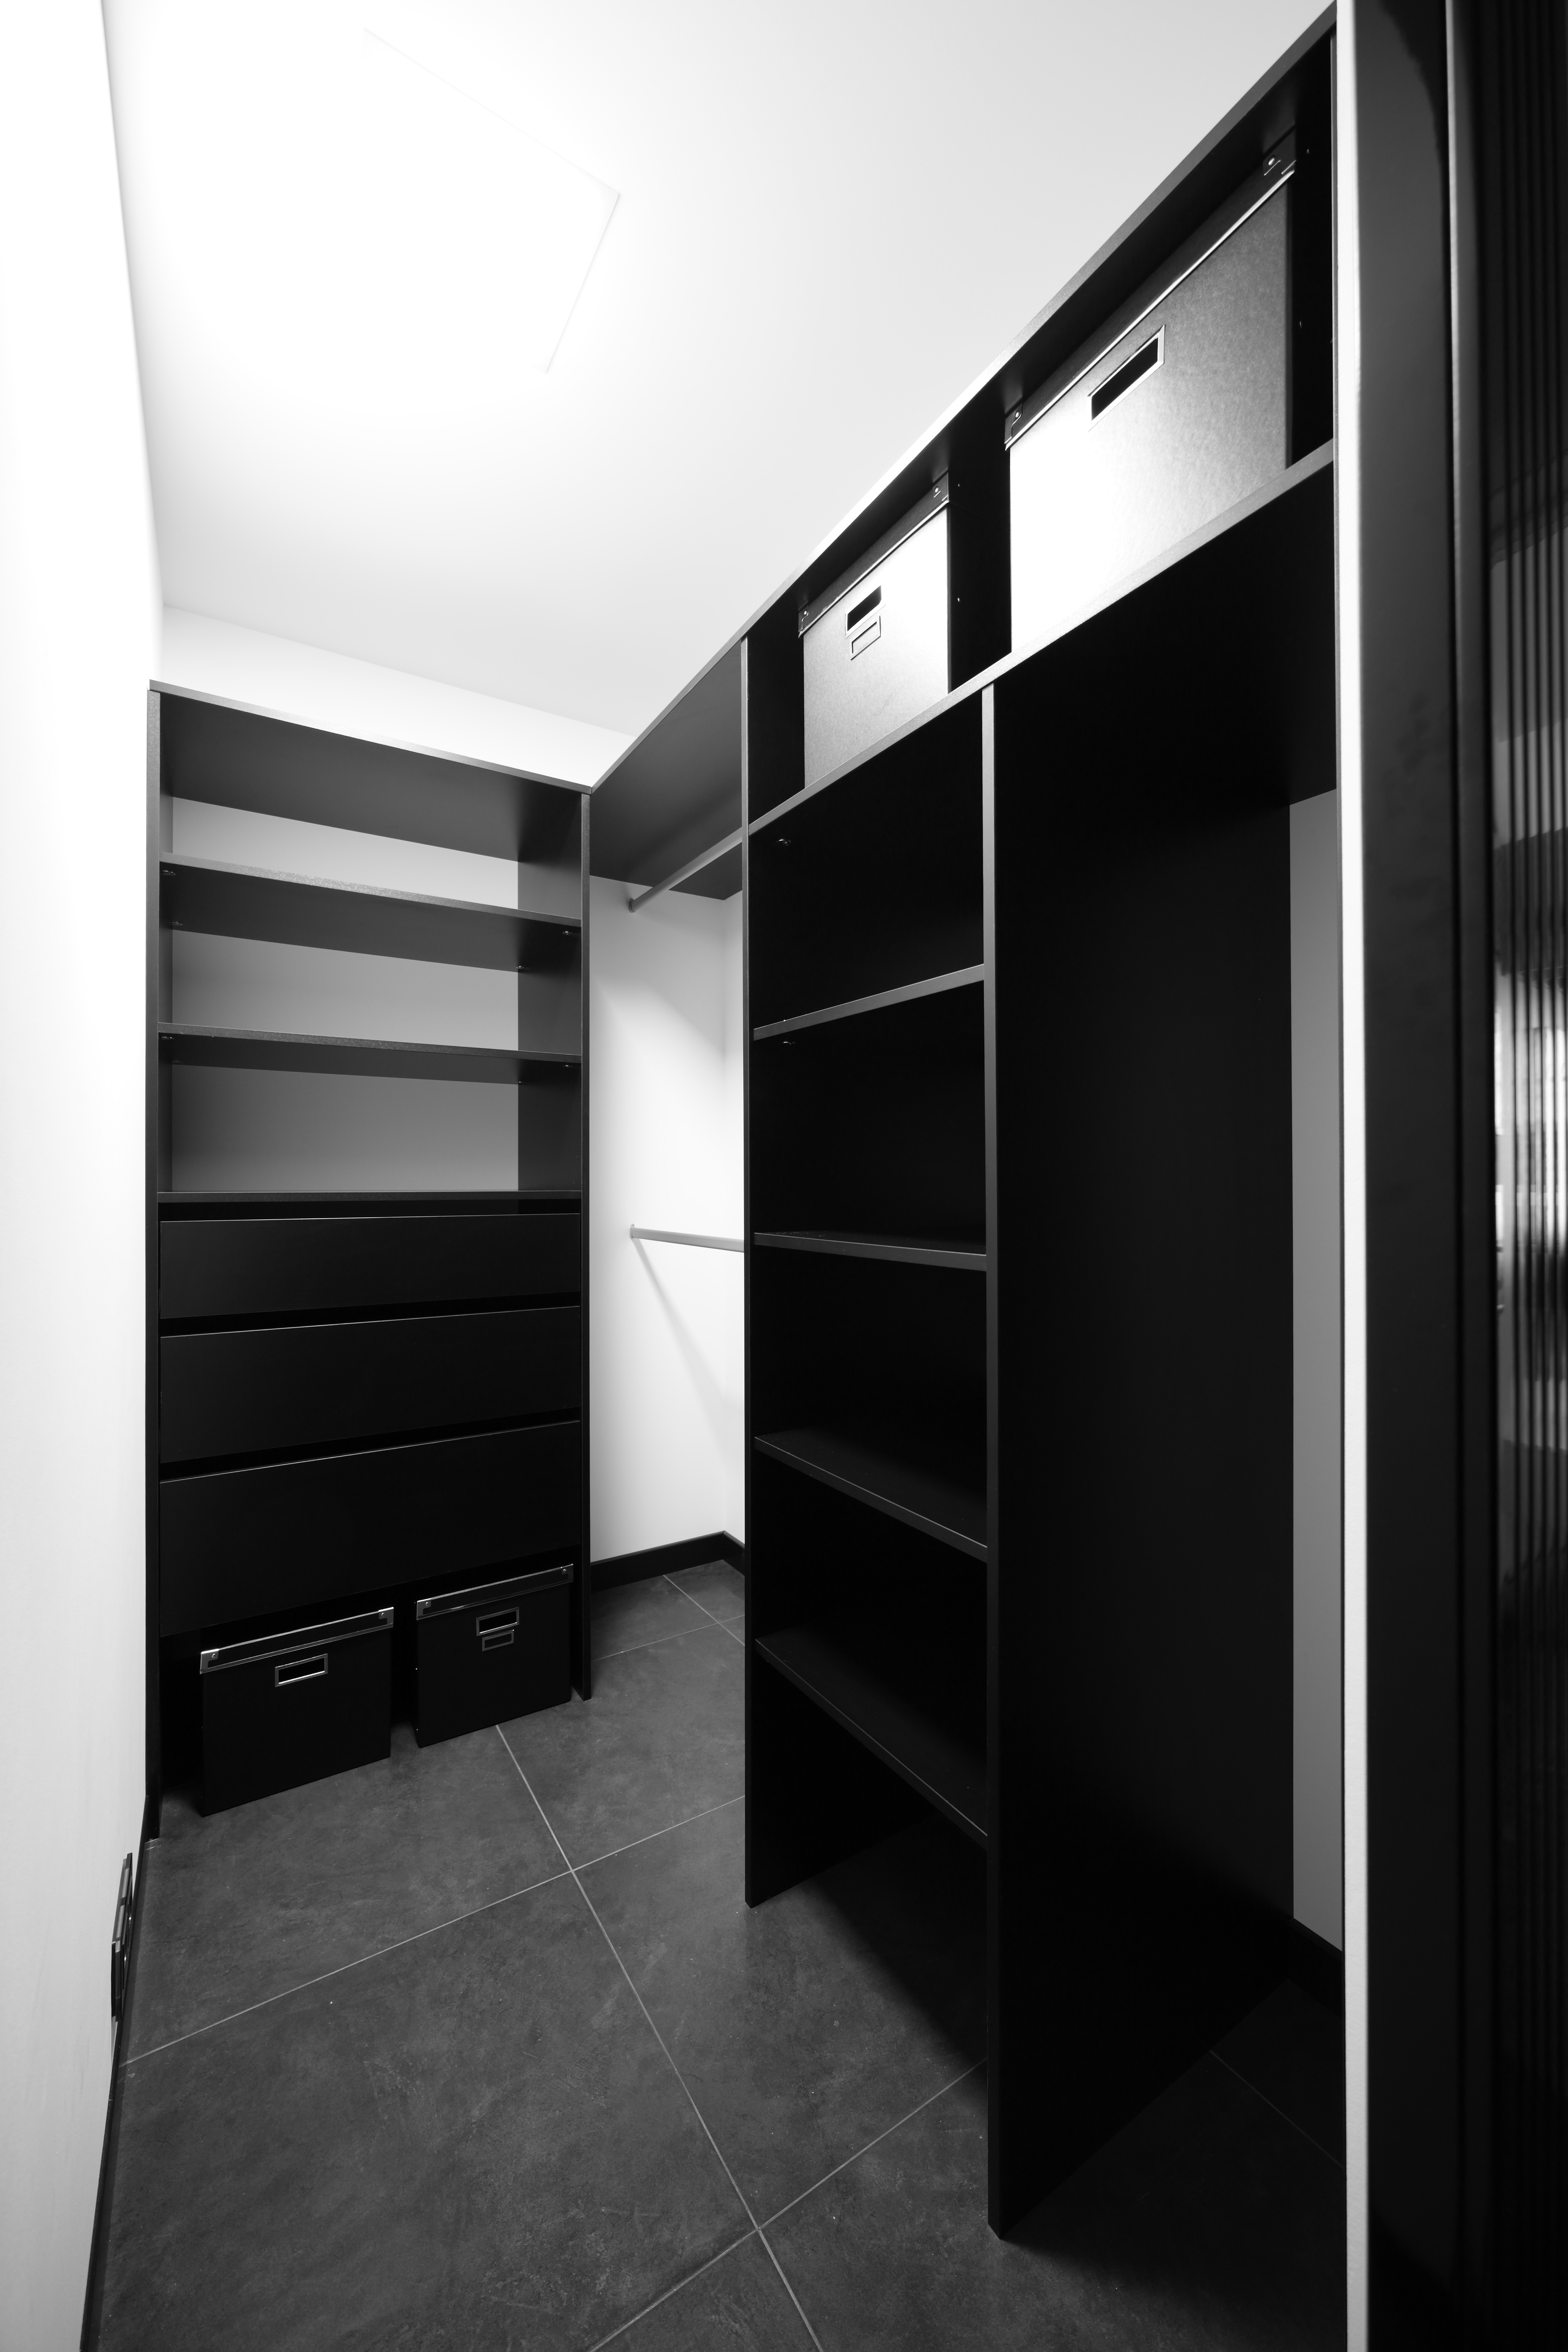 Walk In Closet Designs For Every Personality Type photo - 2